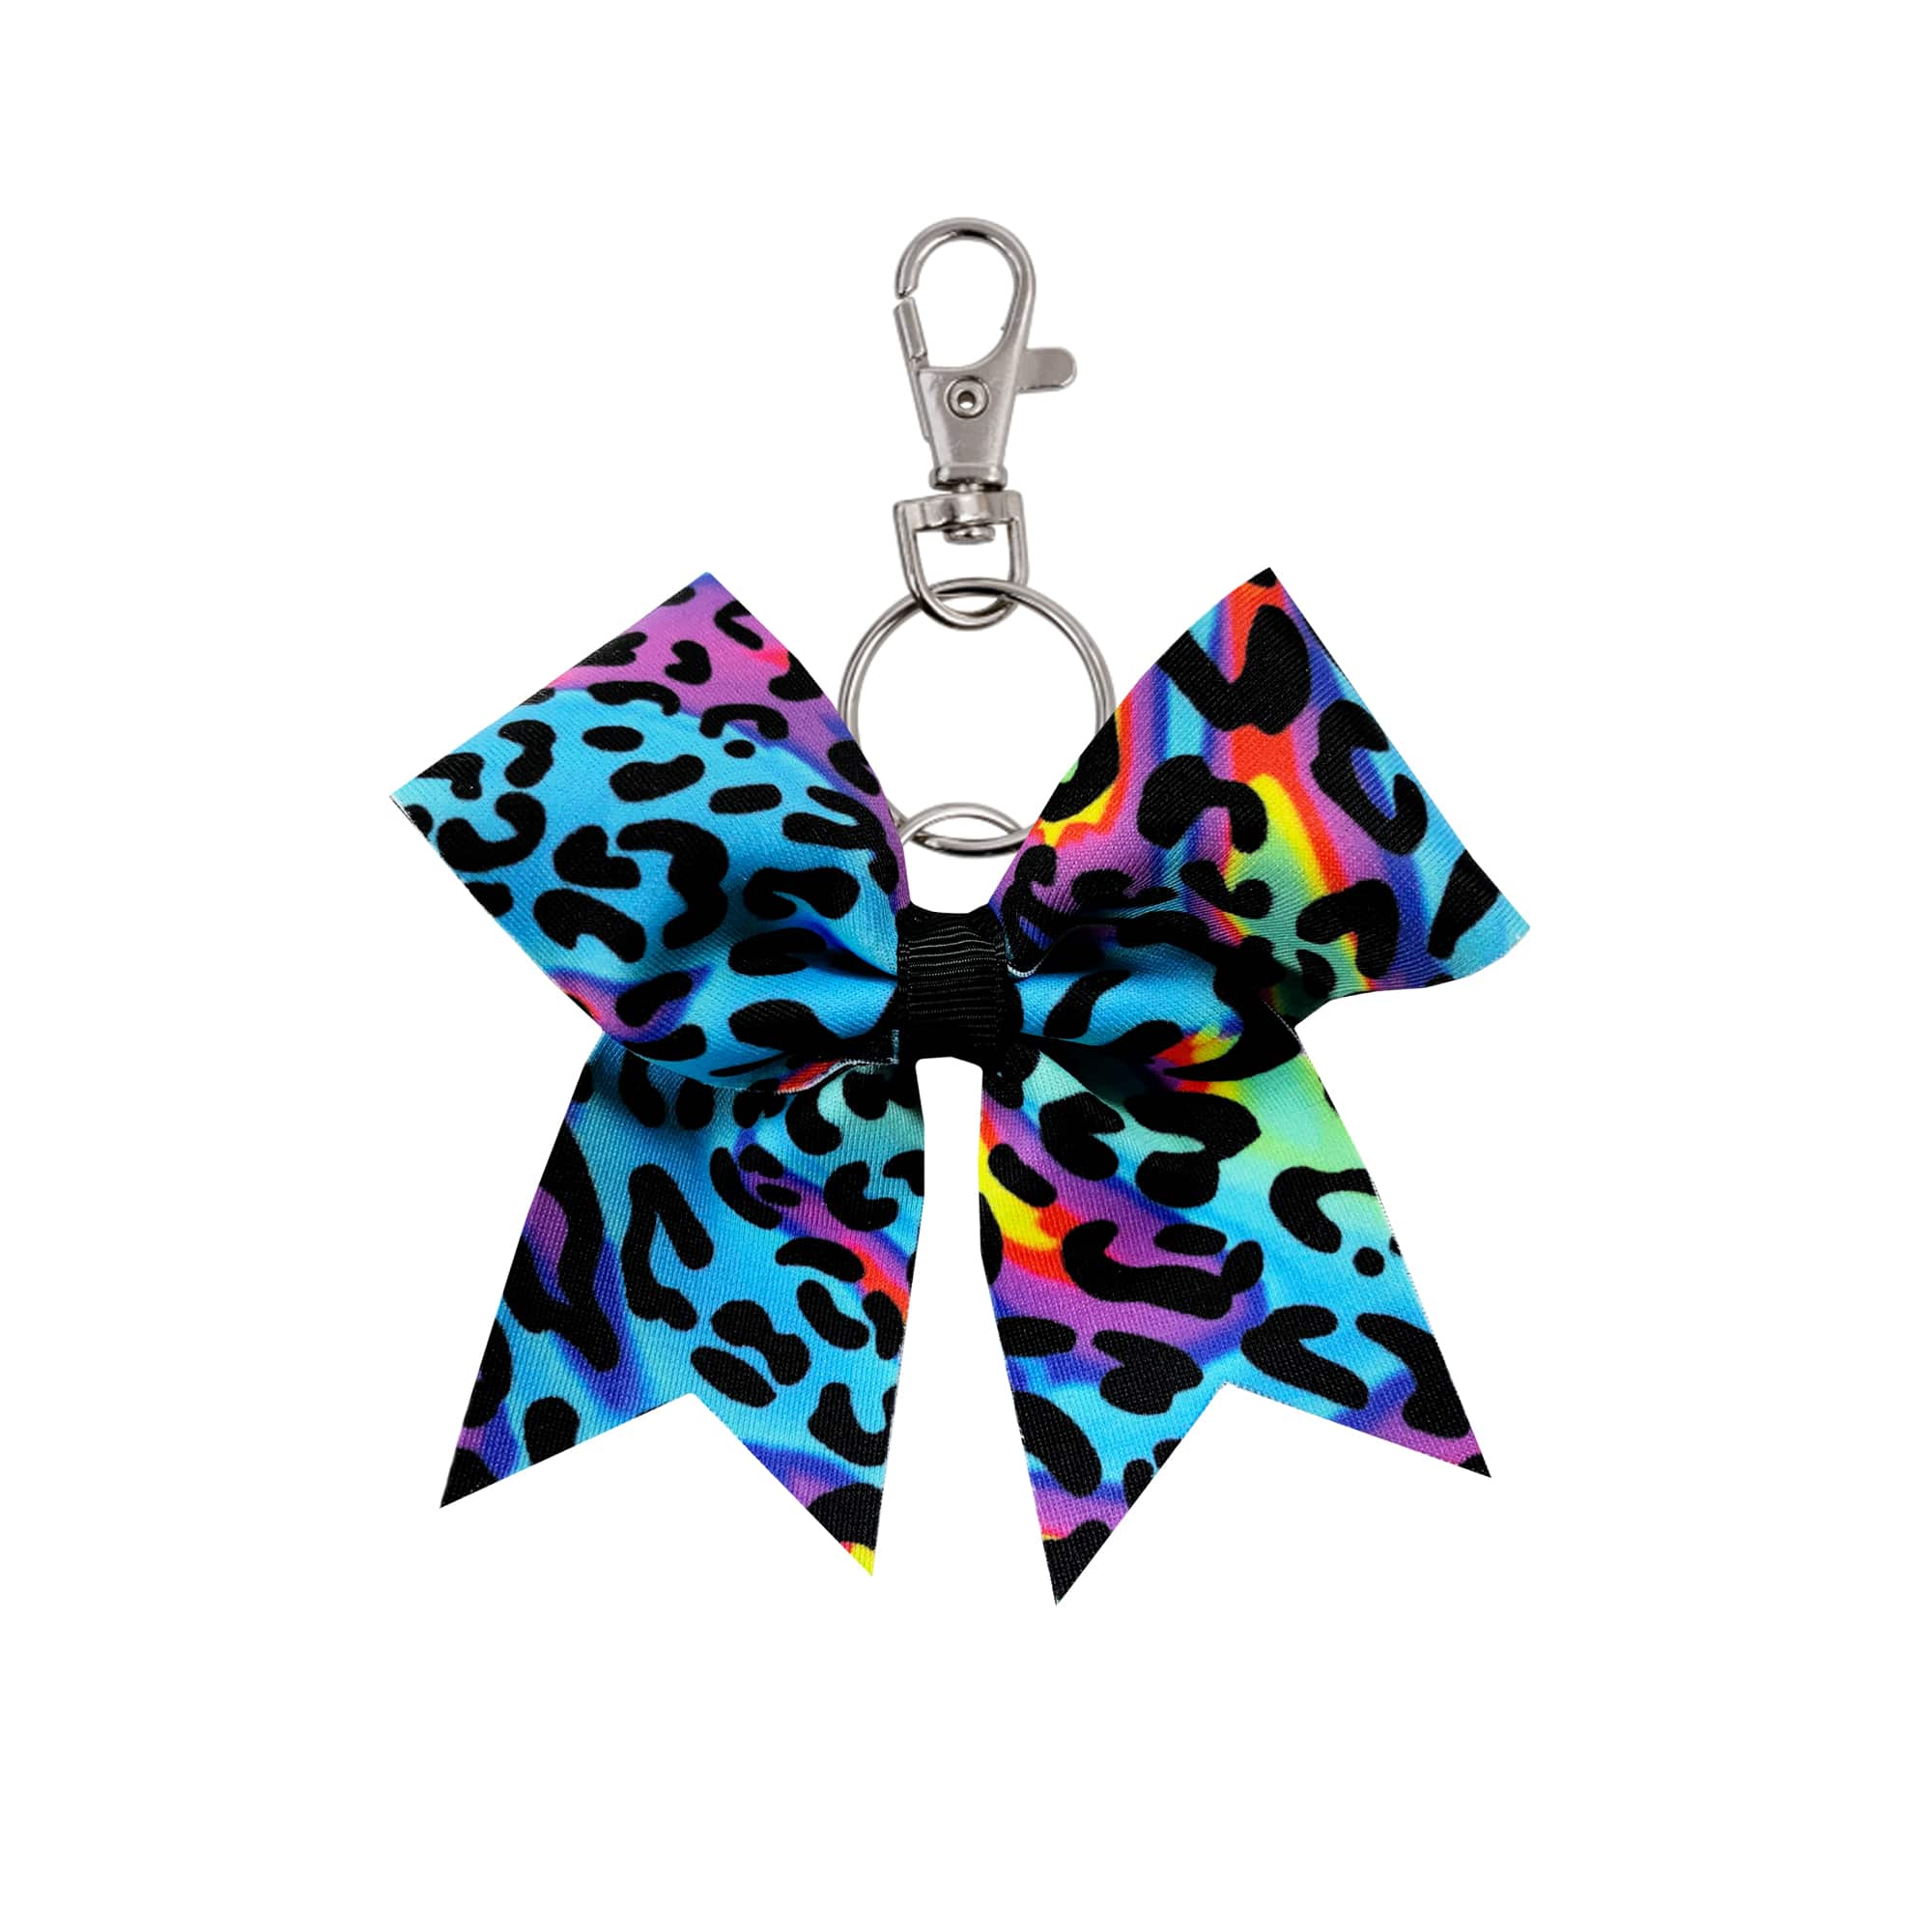 Neon Leopard hairbow keyring